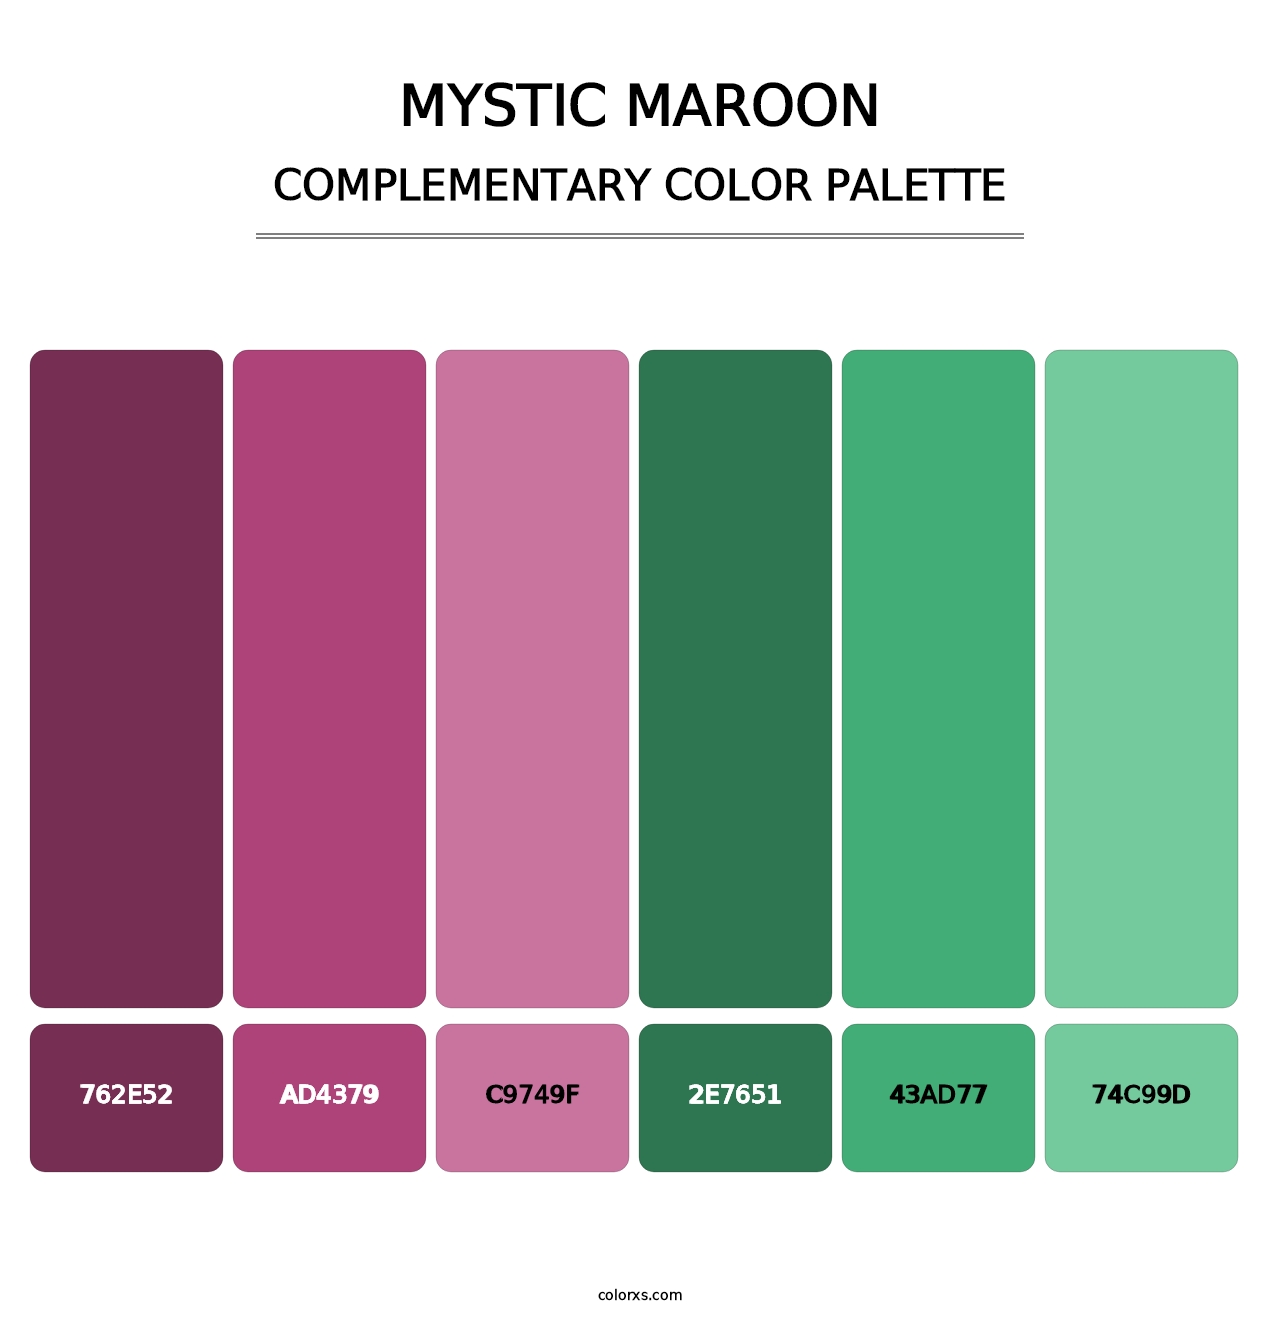 Mystic Maroon - Complementary Color Palette